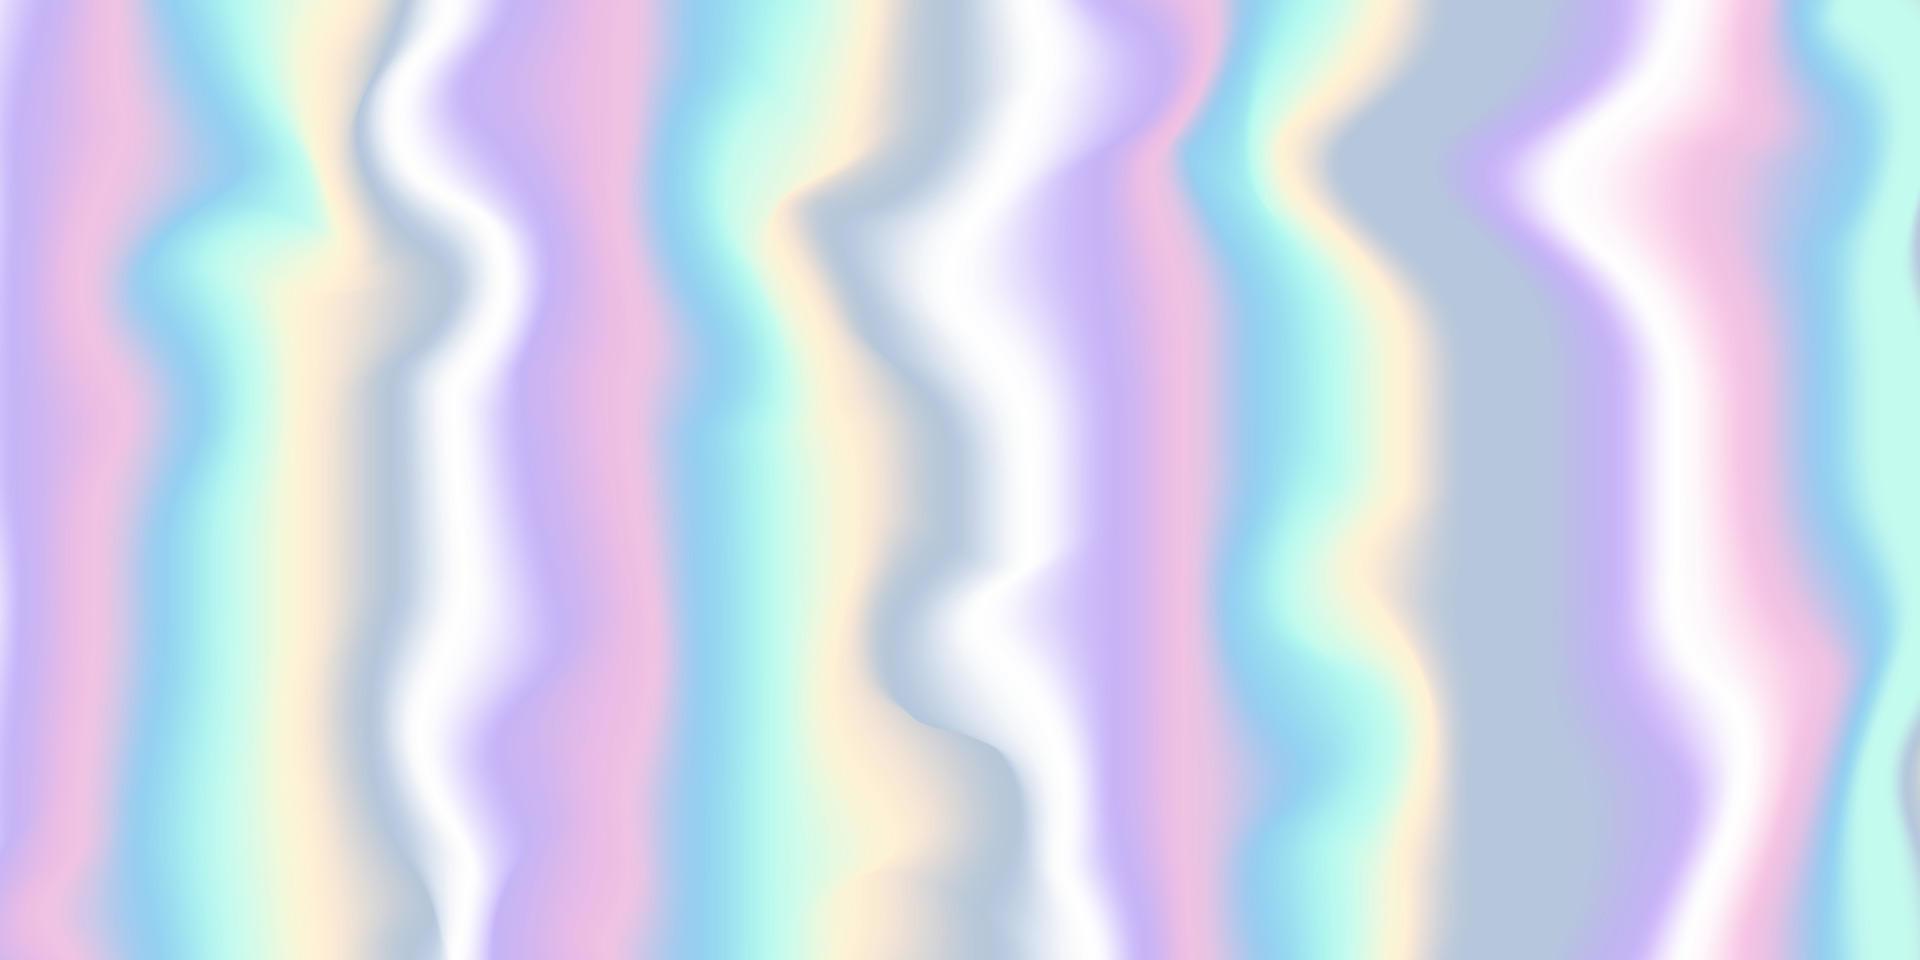 Horizontal Vibrant Holography Effect Background. Abstract Rainbow Pastel Pattern. Light Blur Decoration Holographic Background. Trendy Modern Wallpaper Design. Vector Illustration